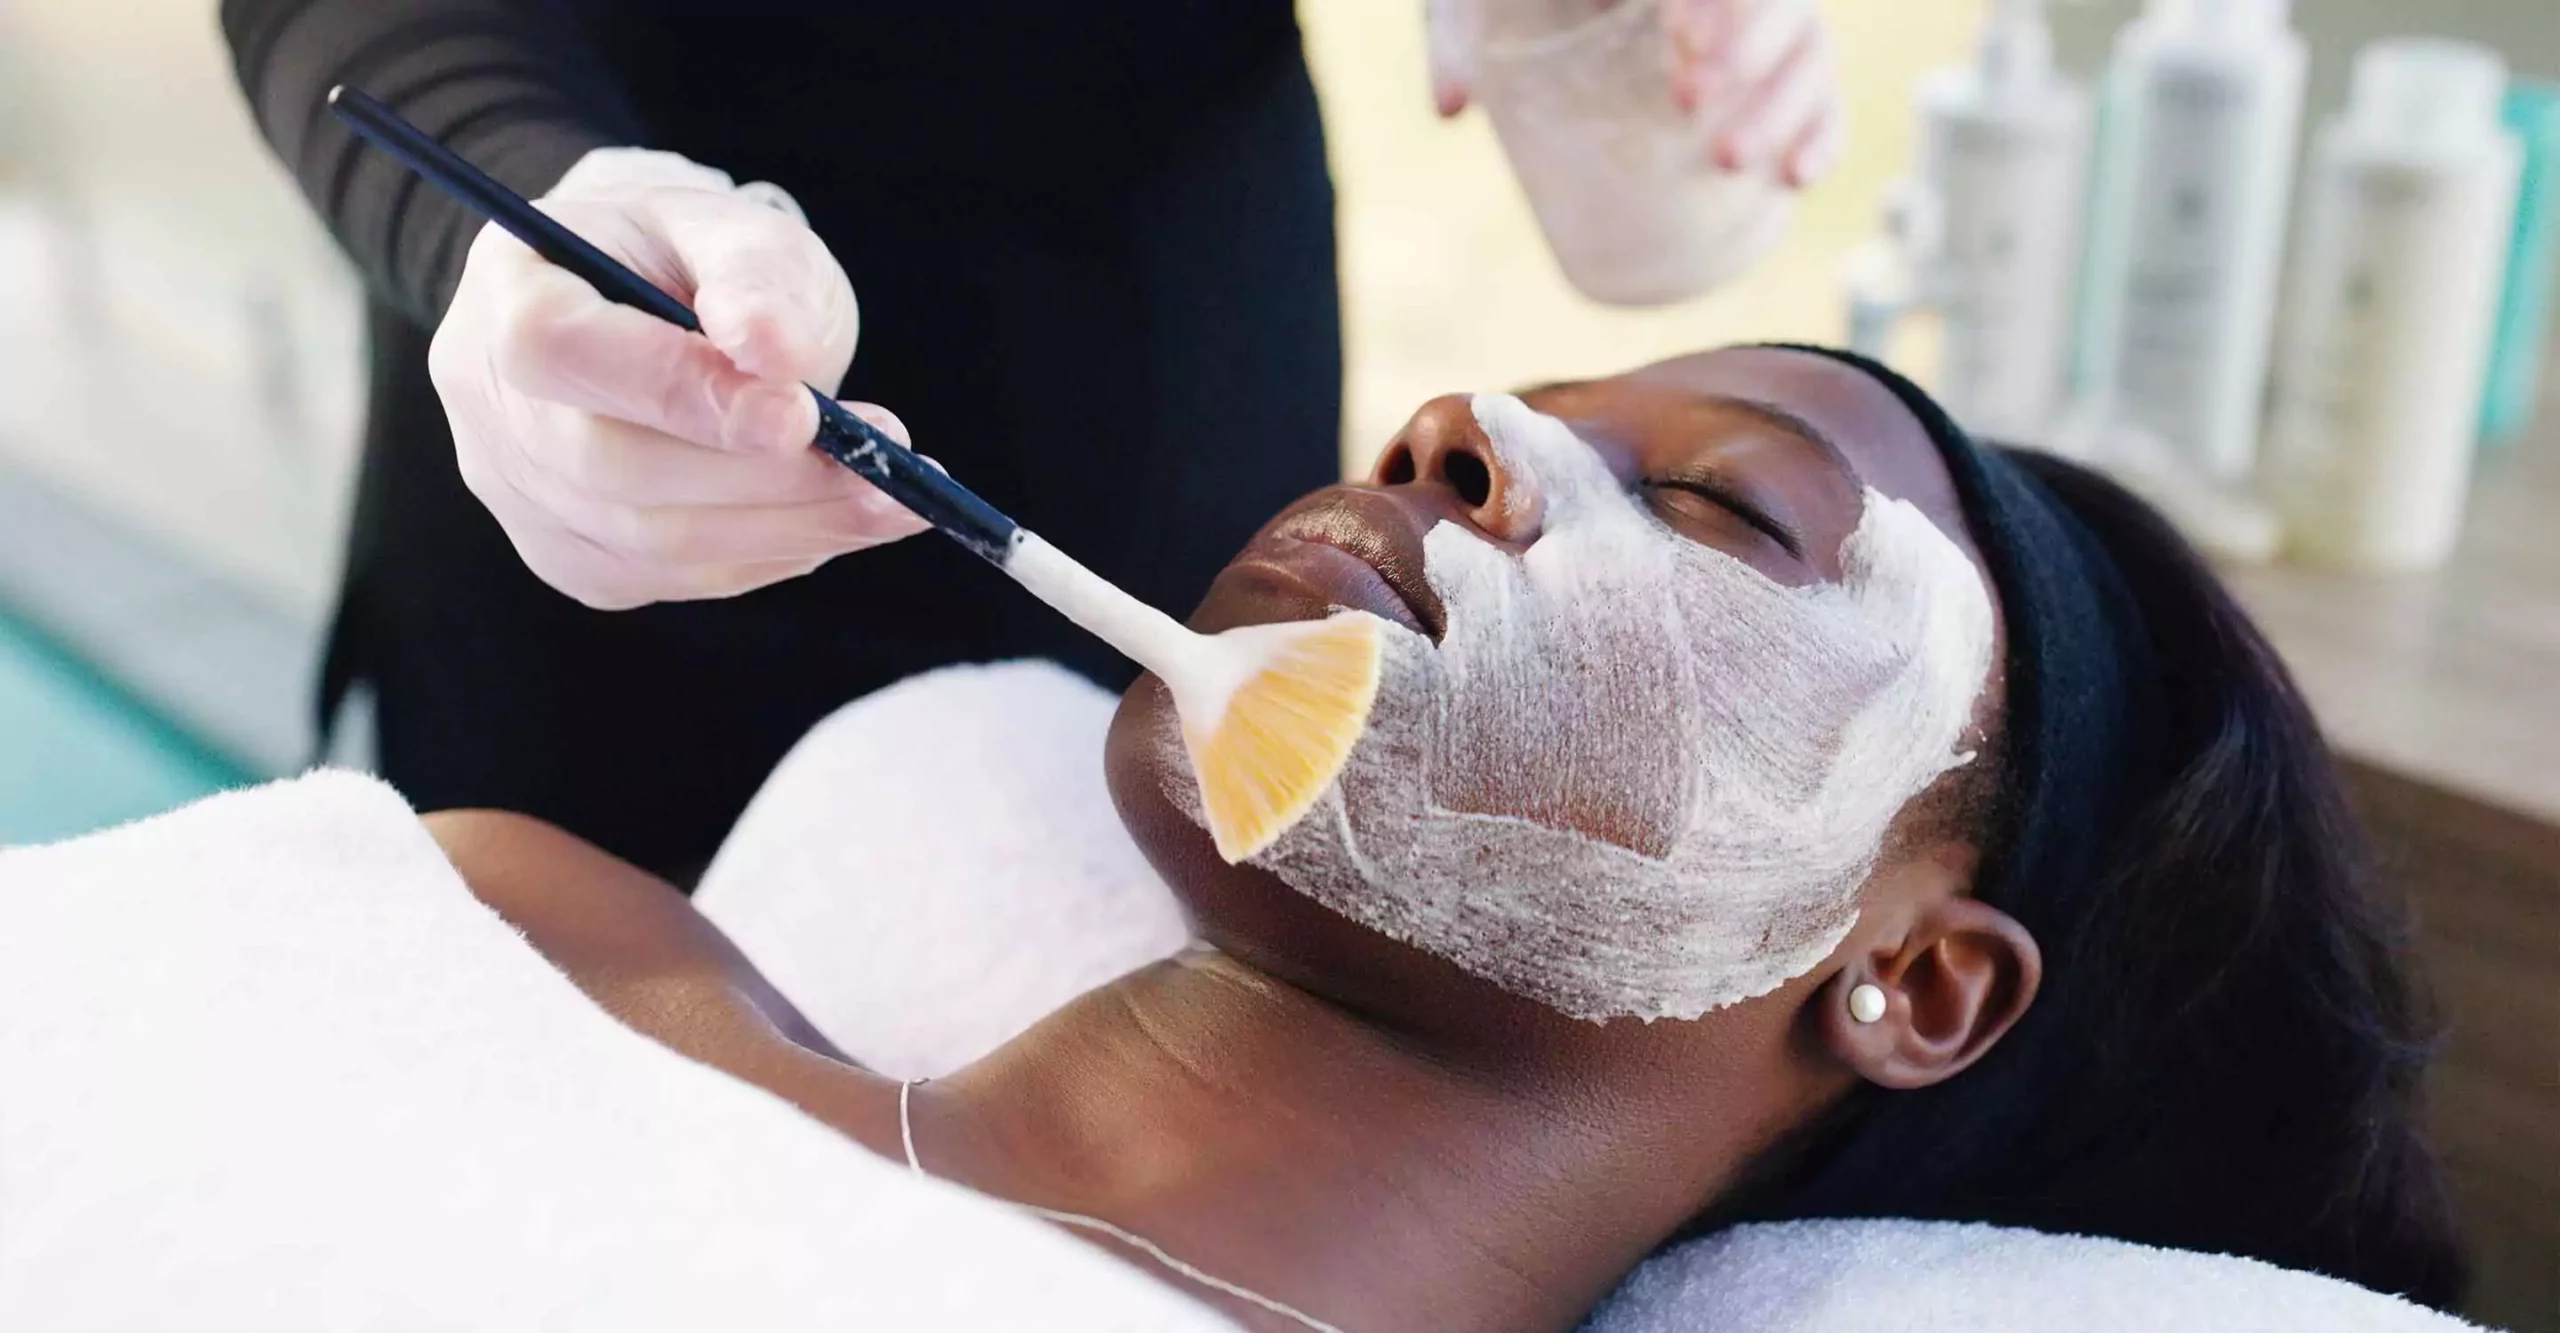 Woman receiving a chemical peel treatment from her esthetician.